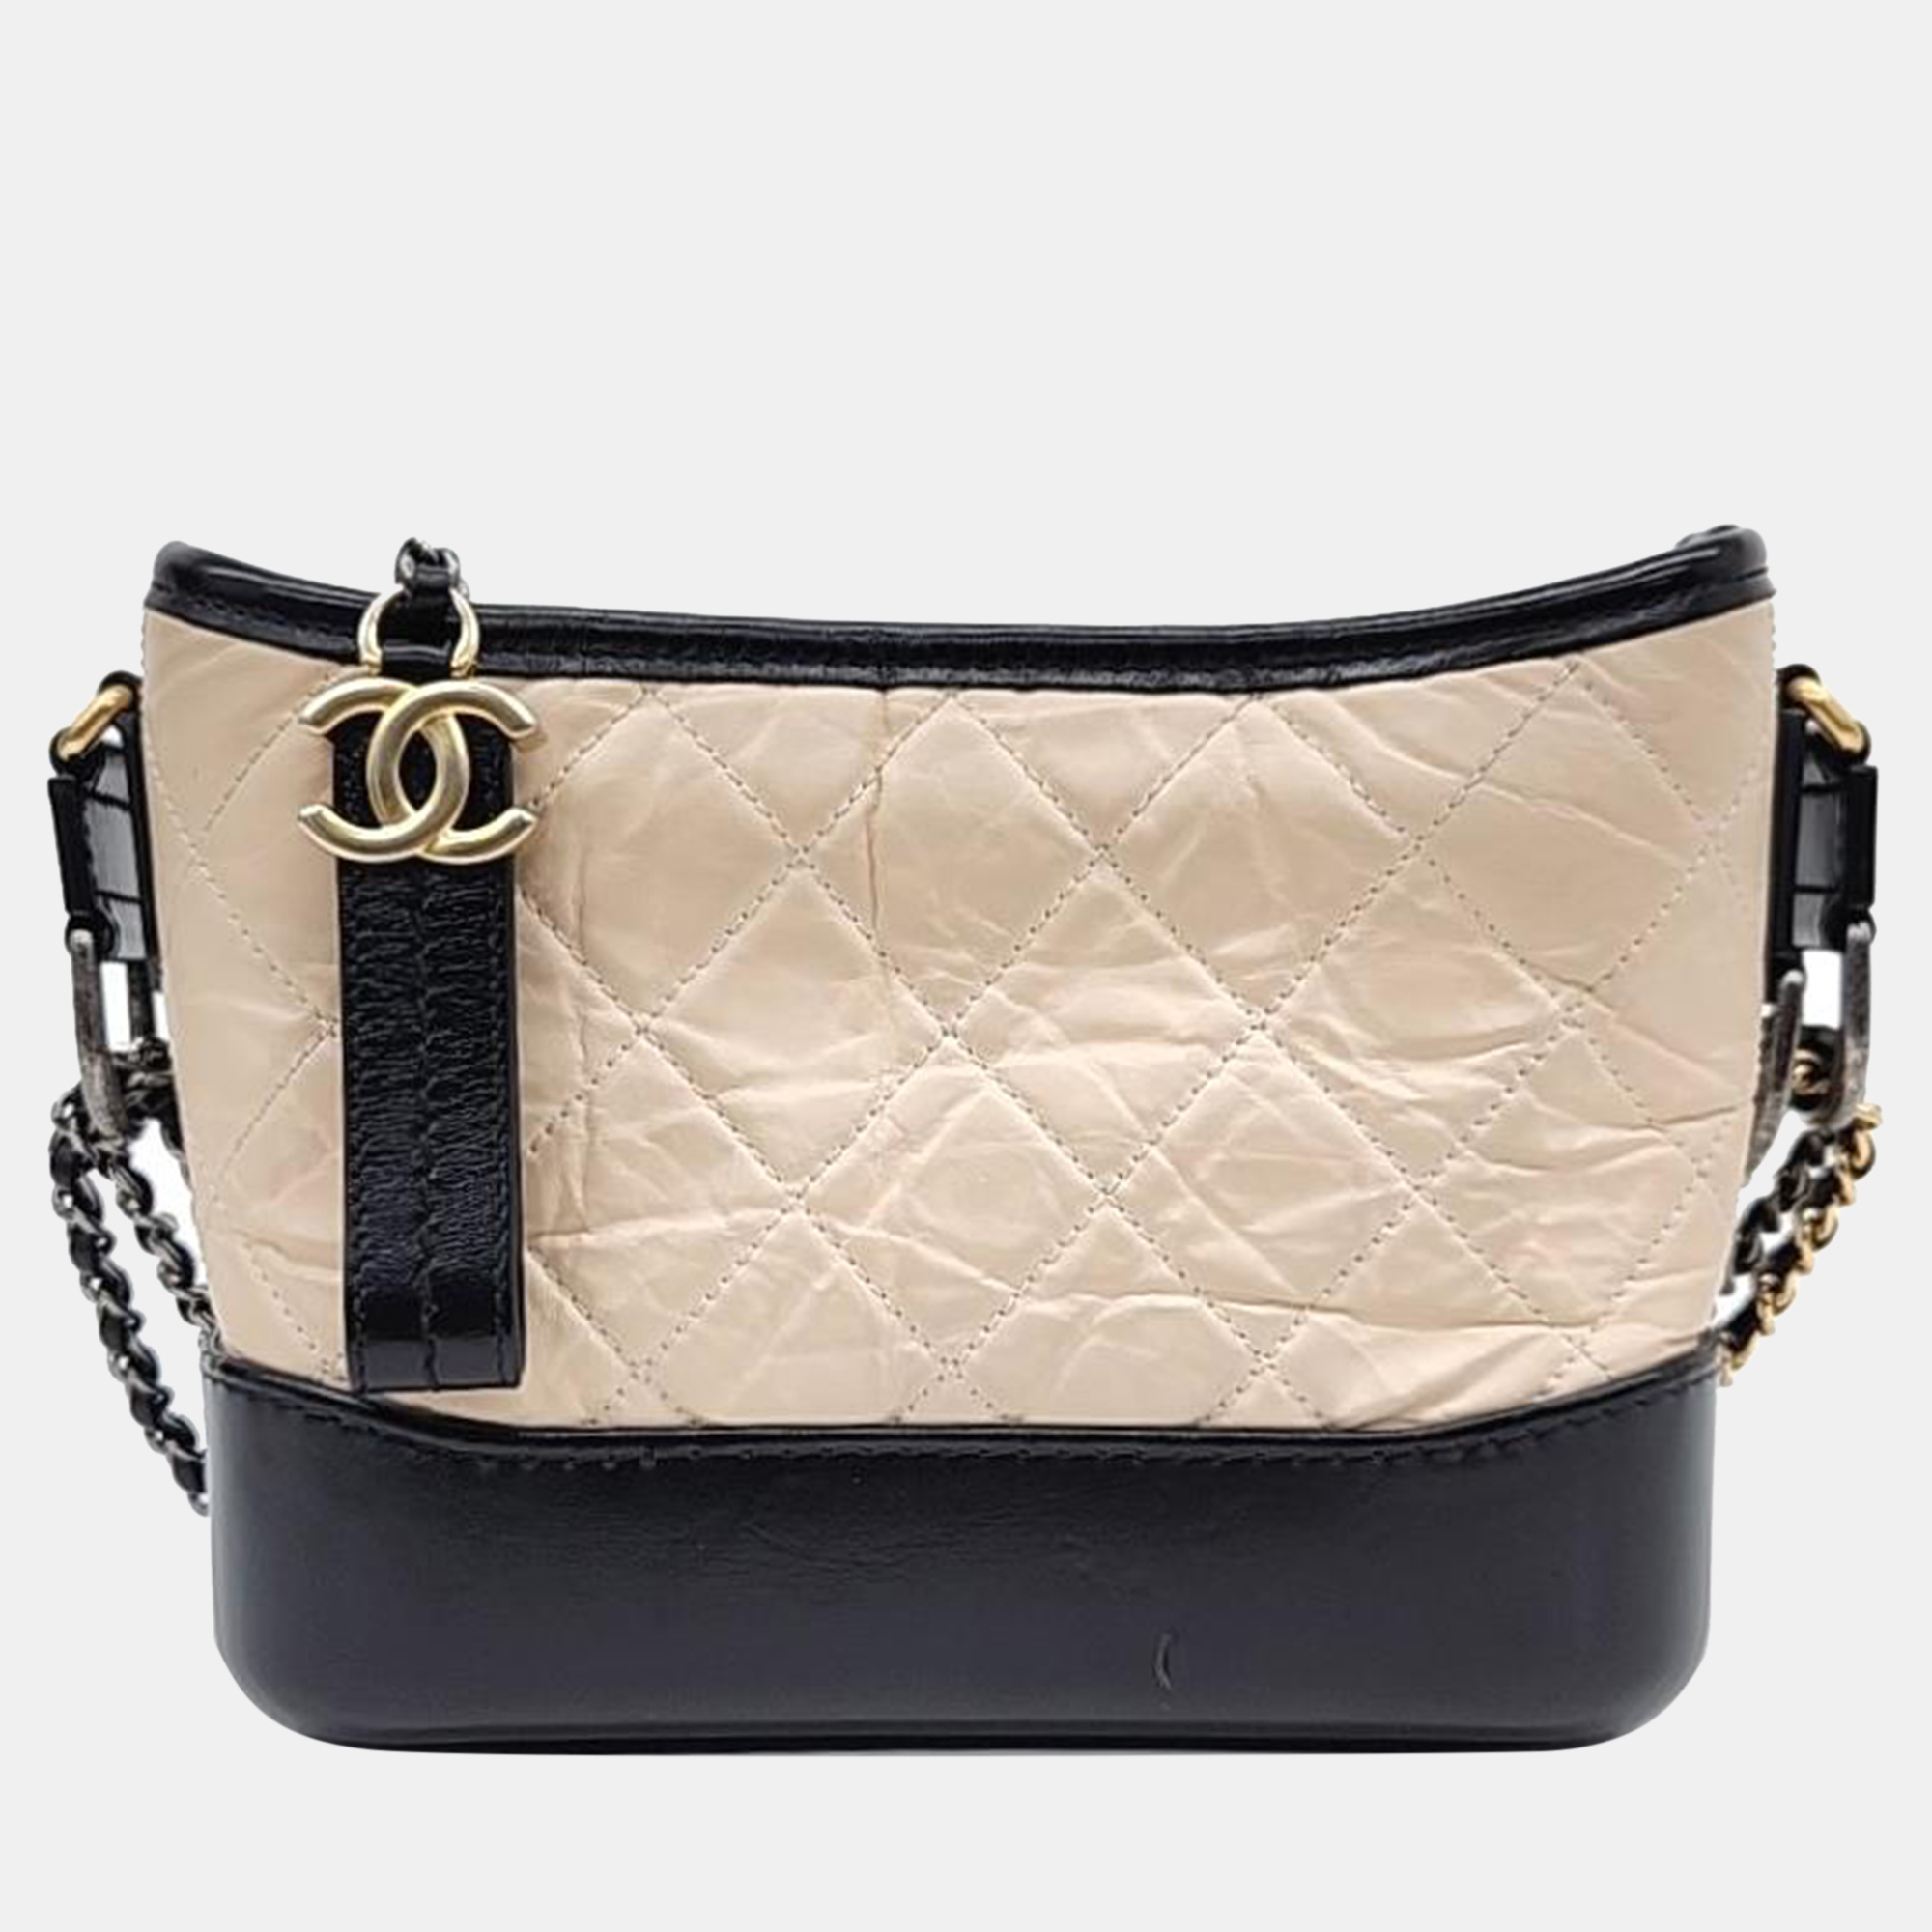 Chanel black/beige leather small gabrielle hobo bag